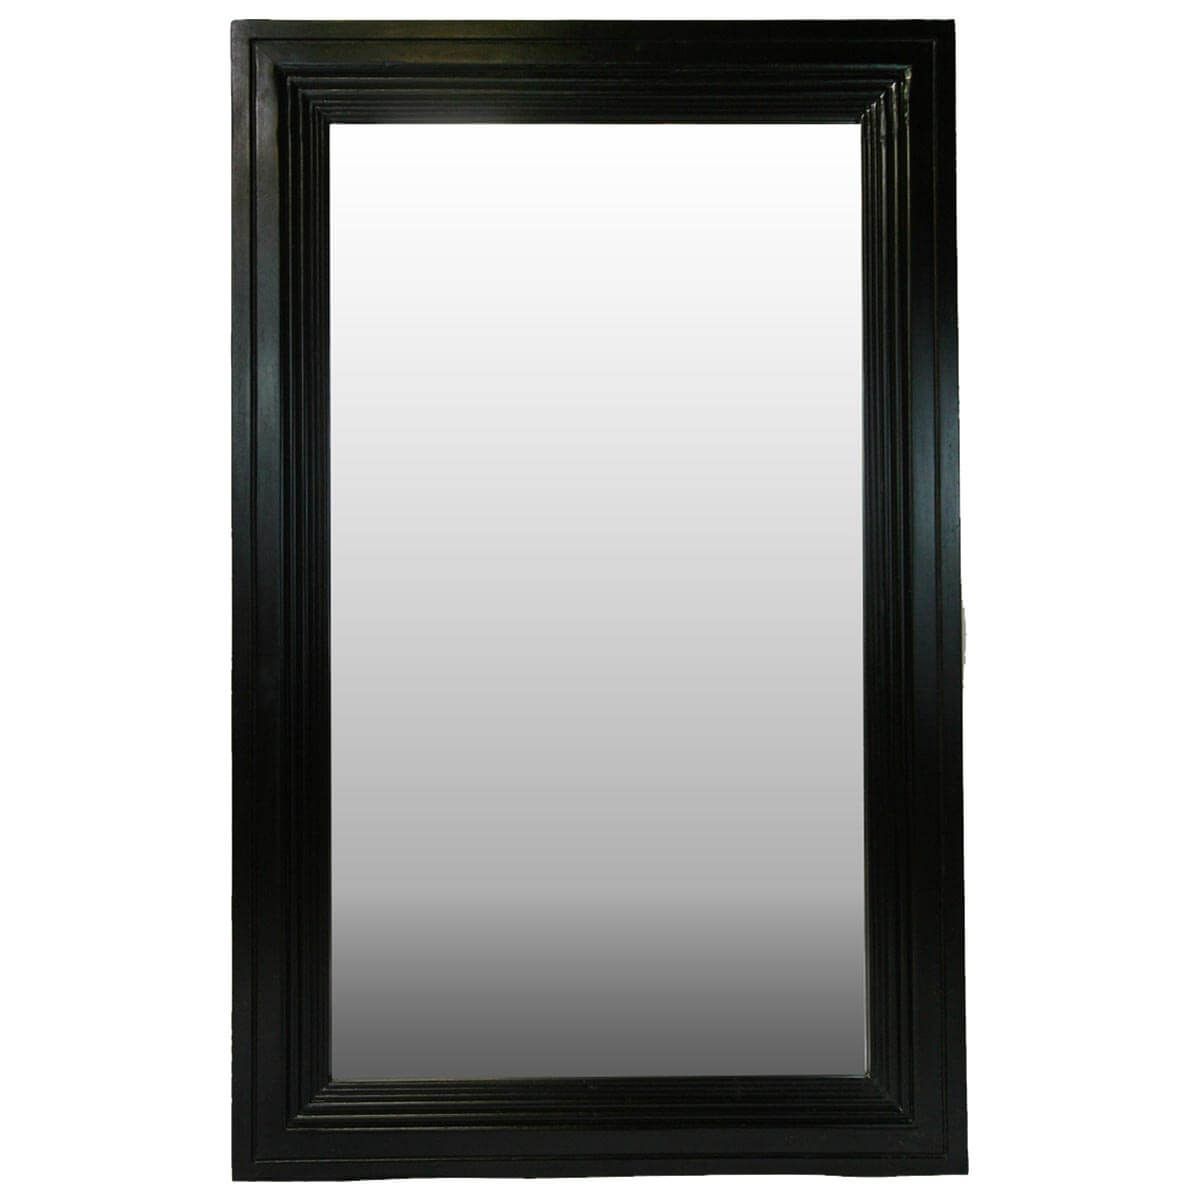 Frontier Rustic Acacia Wood Black Distressed Wall Mirror Frame Throughout Rustic Industrial Black Frame Wall Mirrors (View 3 of 15)